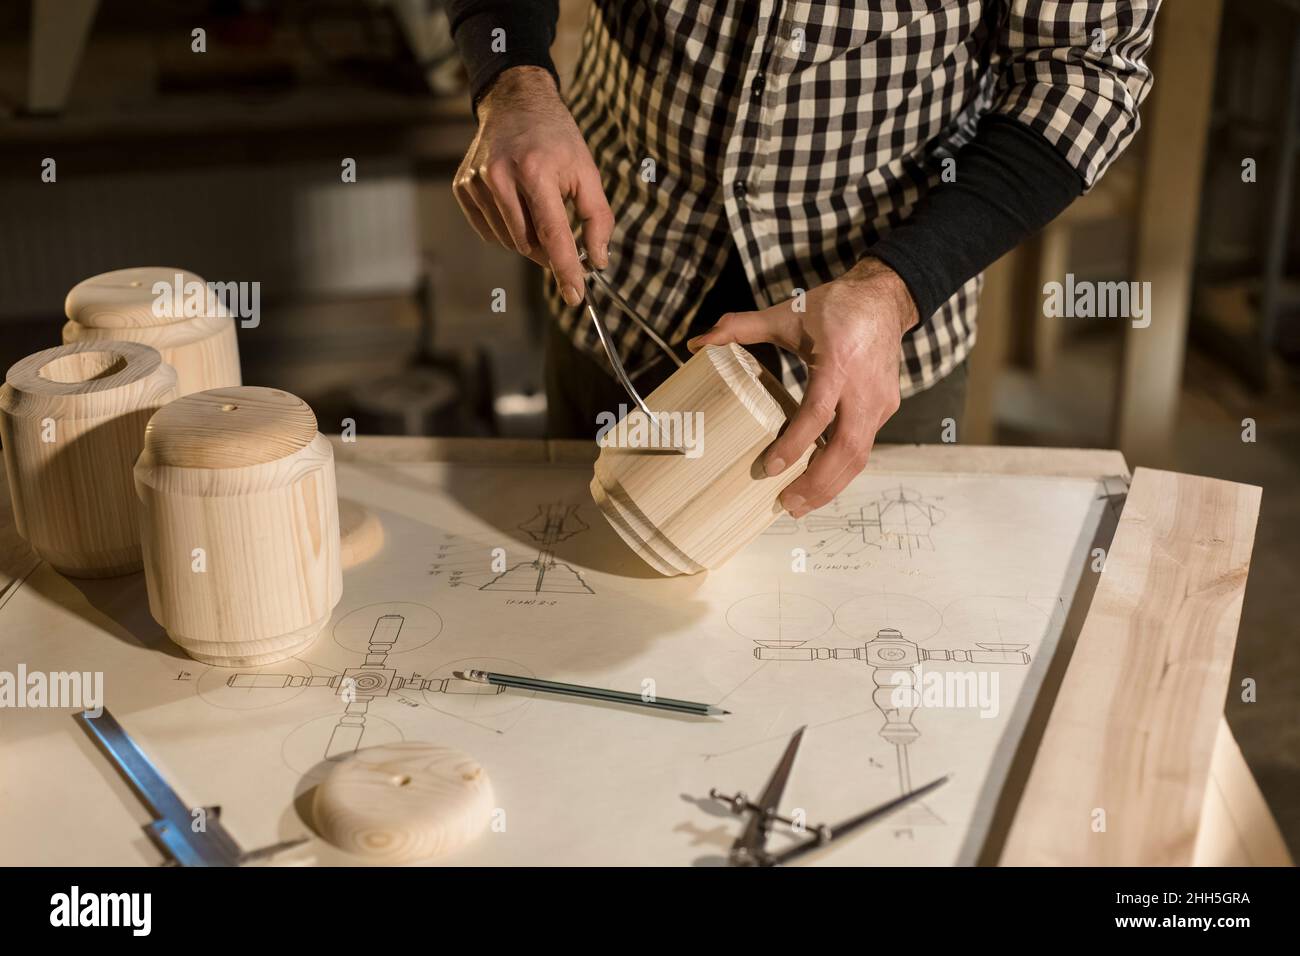 Woodworker measuring wood with equipment in workshop Stock Photo